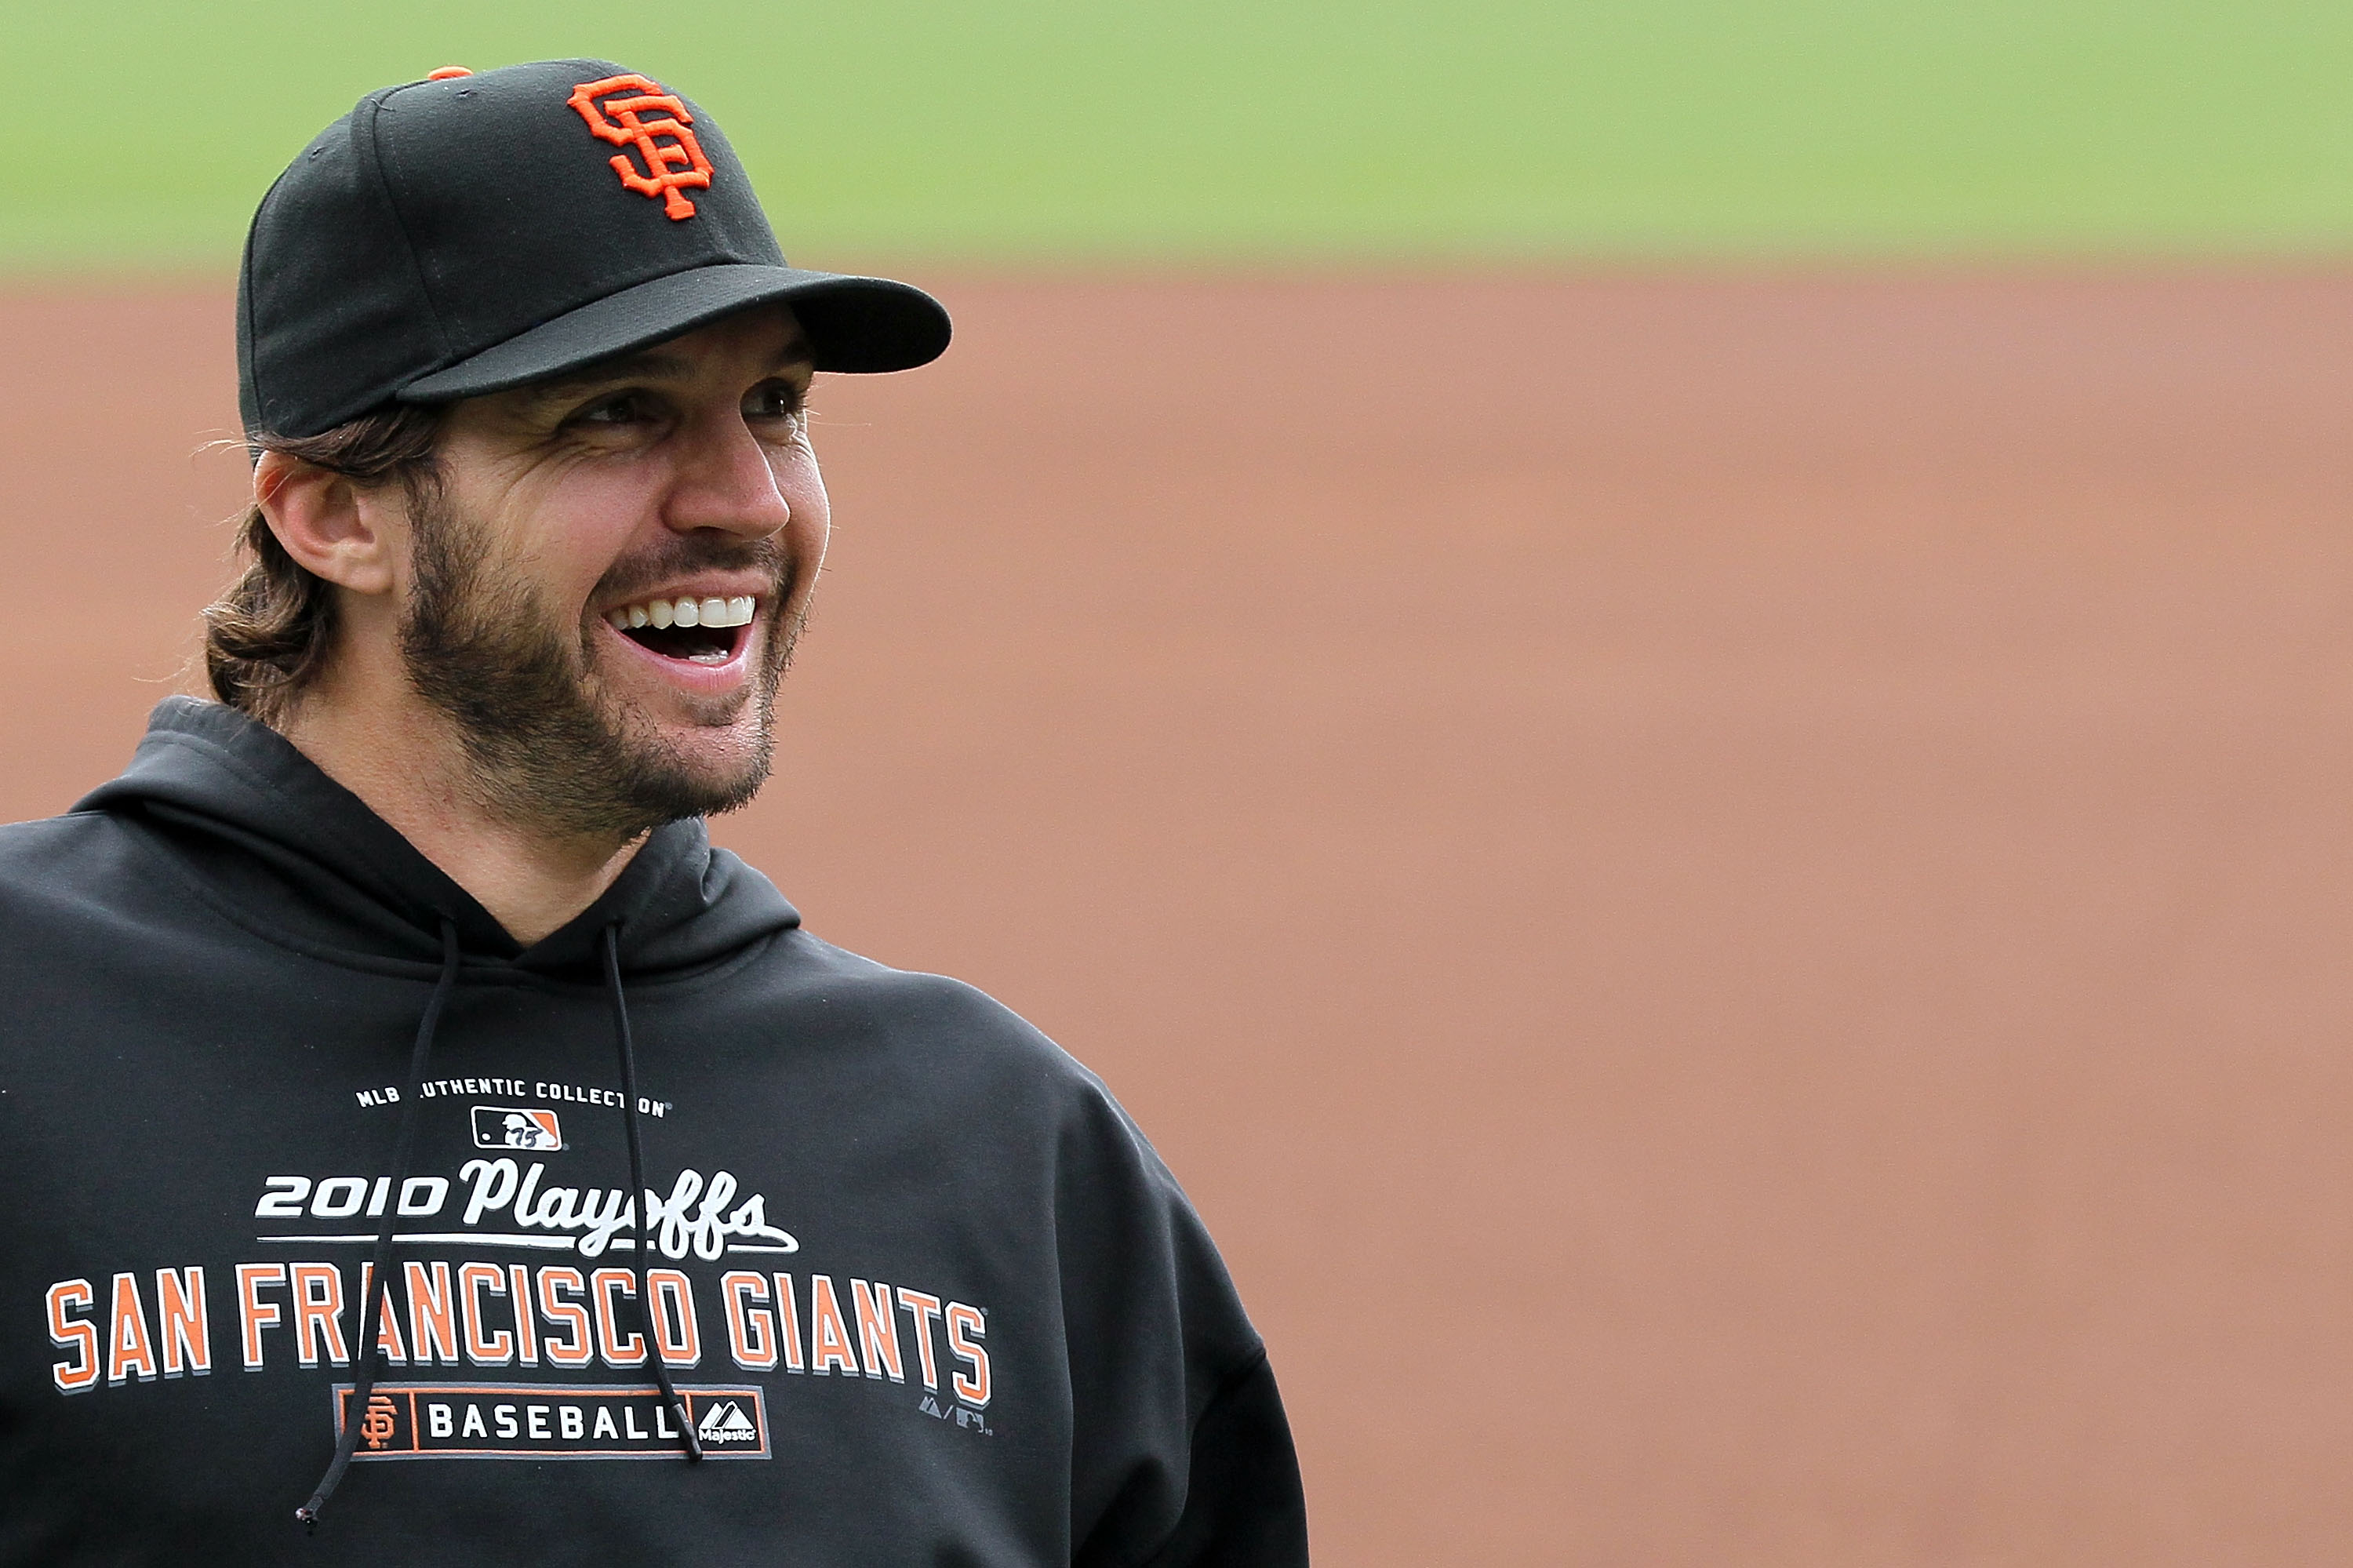 Former major league pitcher Barry Zito finds second career in